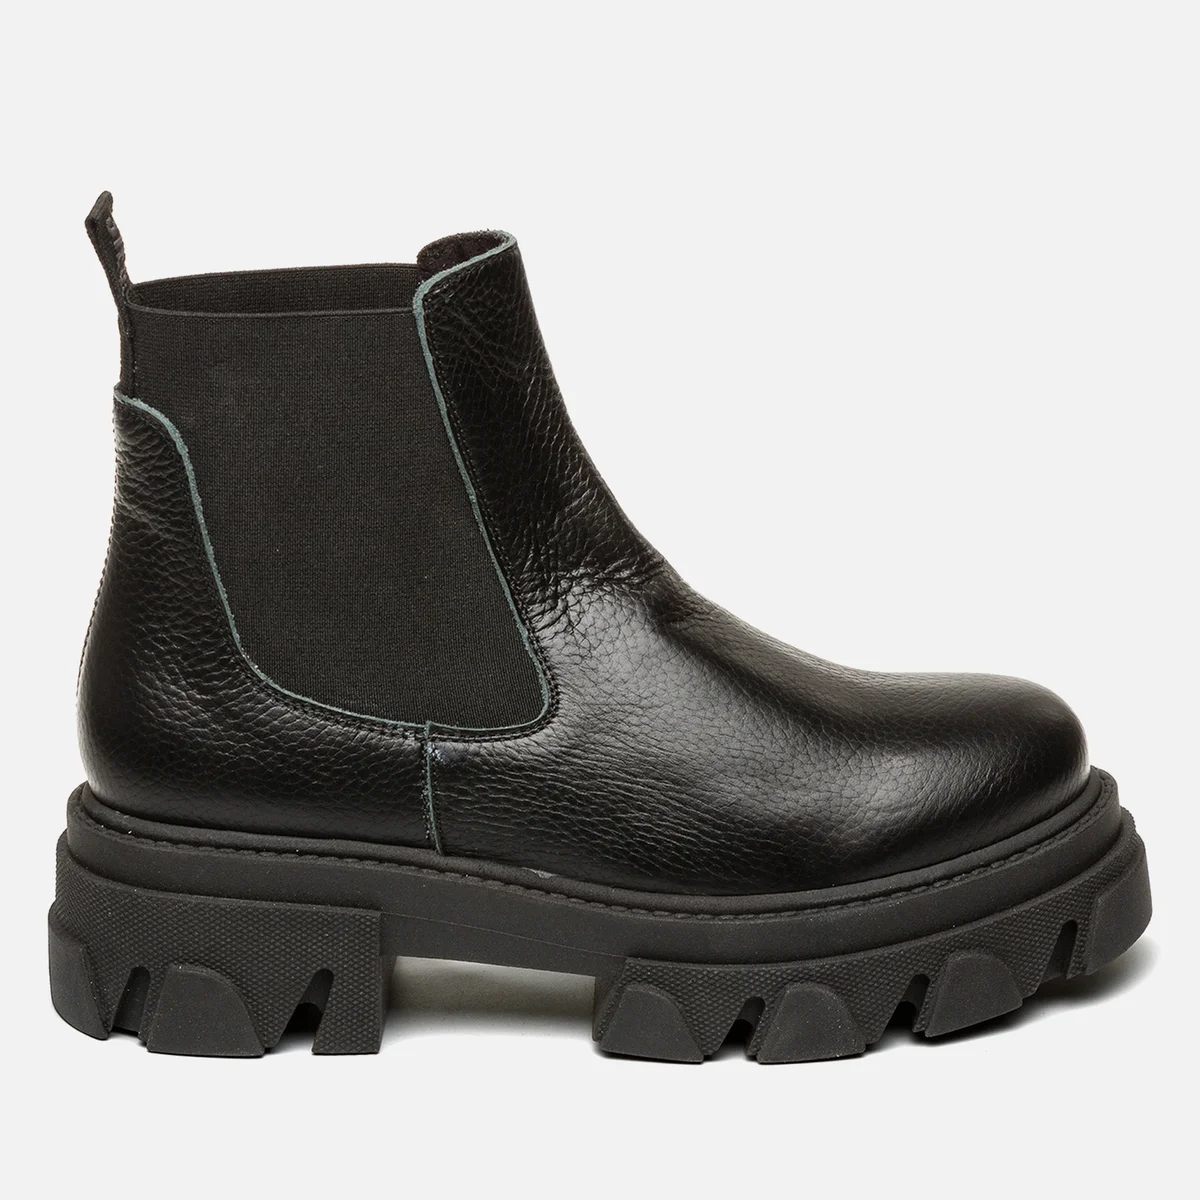 Steve Madden Leather Chelsea Boots Image 1